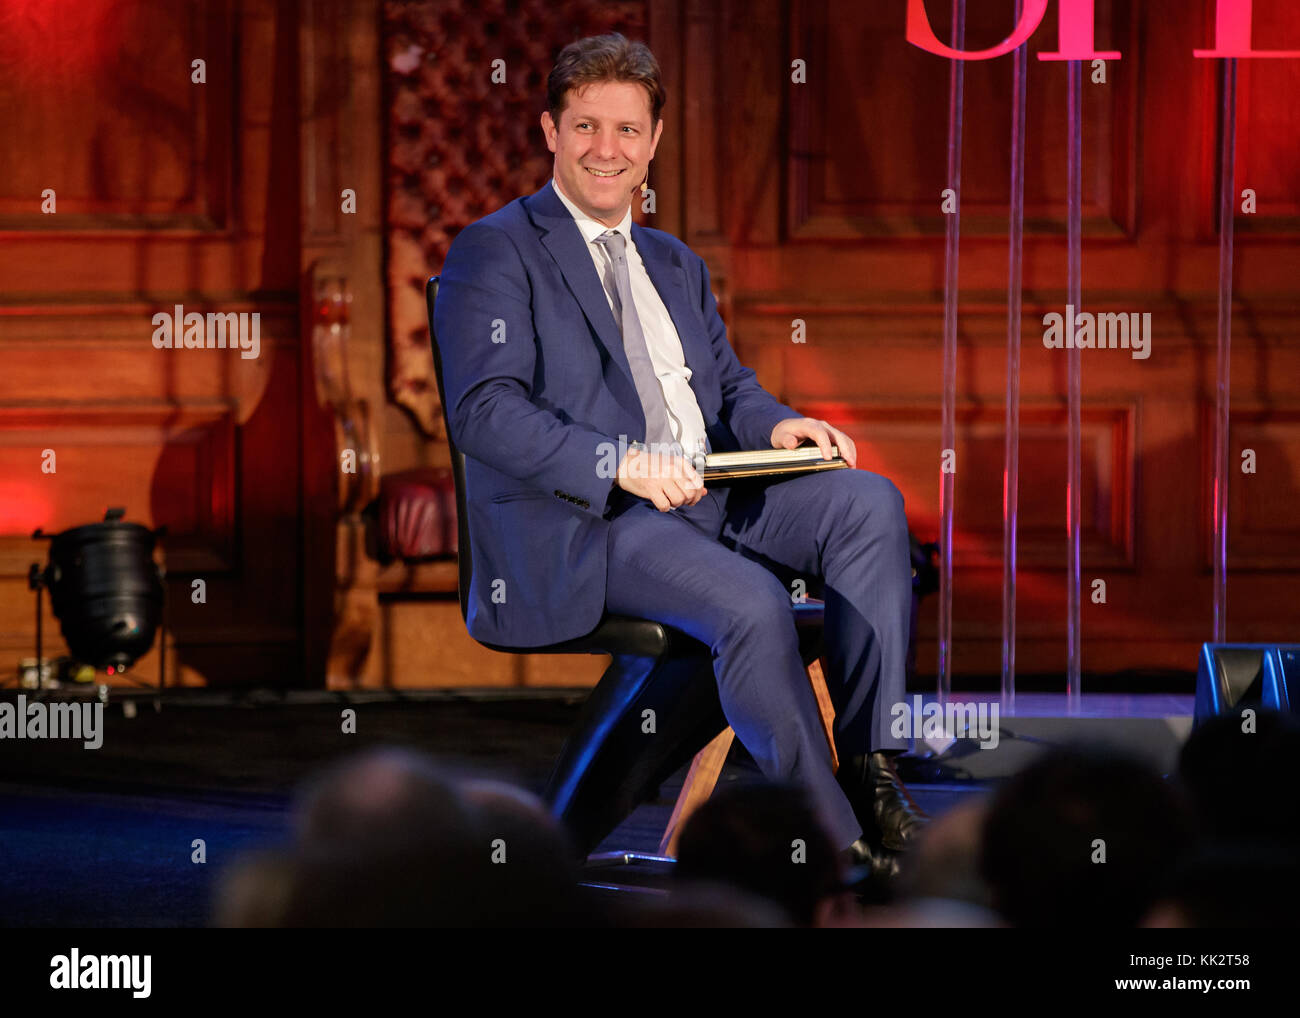 London, UK. 27th Nov, 2017. The Spectator Editor Fraser Nelson during a panel discussion at the Emmanuel Centre, London Credit: Ben Queenborough/Alamy Live News Stock Photo